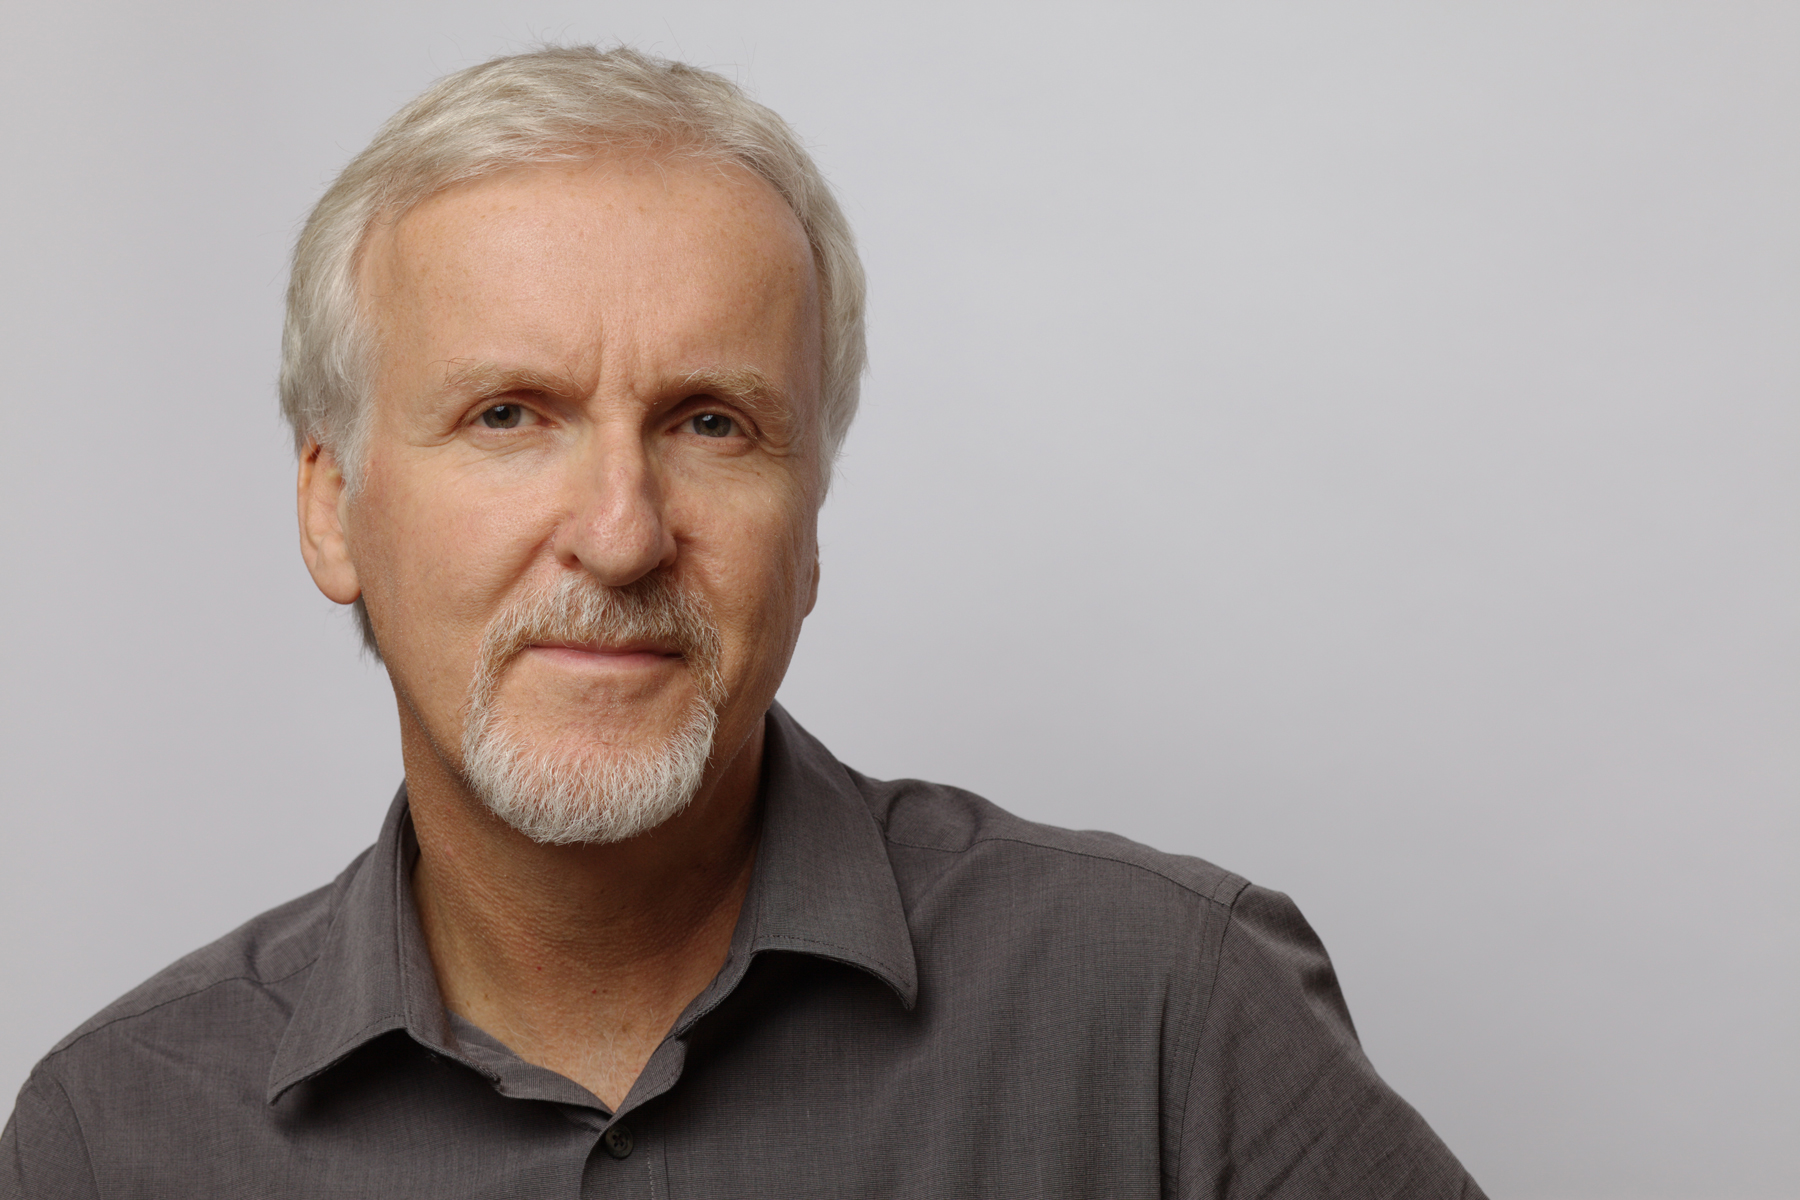 James Cameron: The Future of ‘Avatar Franchise’ Franchise, New Art Book